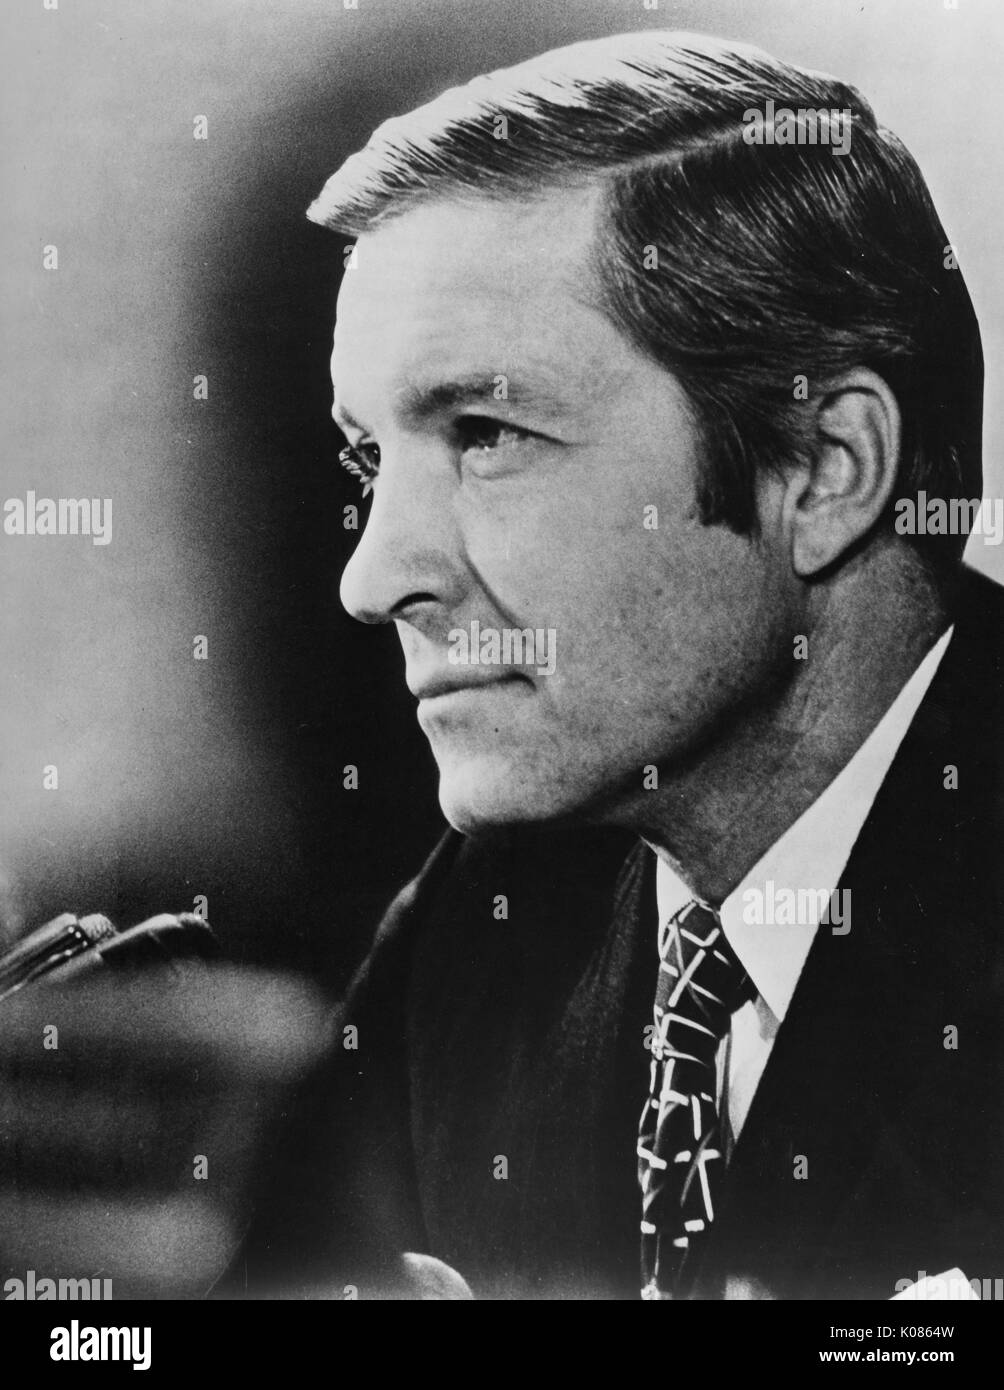 Head-shot of politician Percy Charles, wearing a dark suit and a patterned tie, leaning into a microphone, with tightly combed hair, with a serious facial expression, 1965. Stock Photo